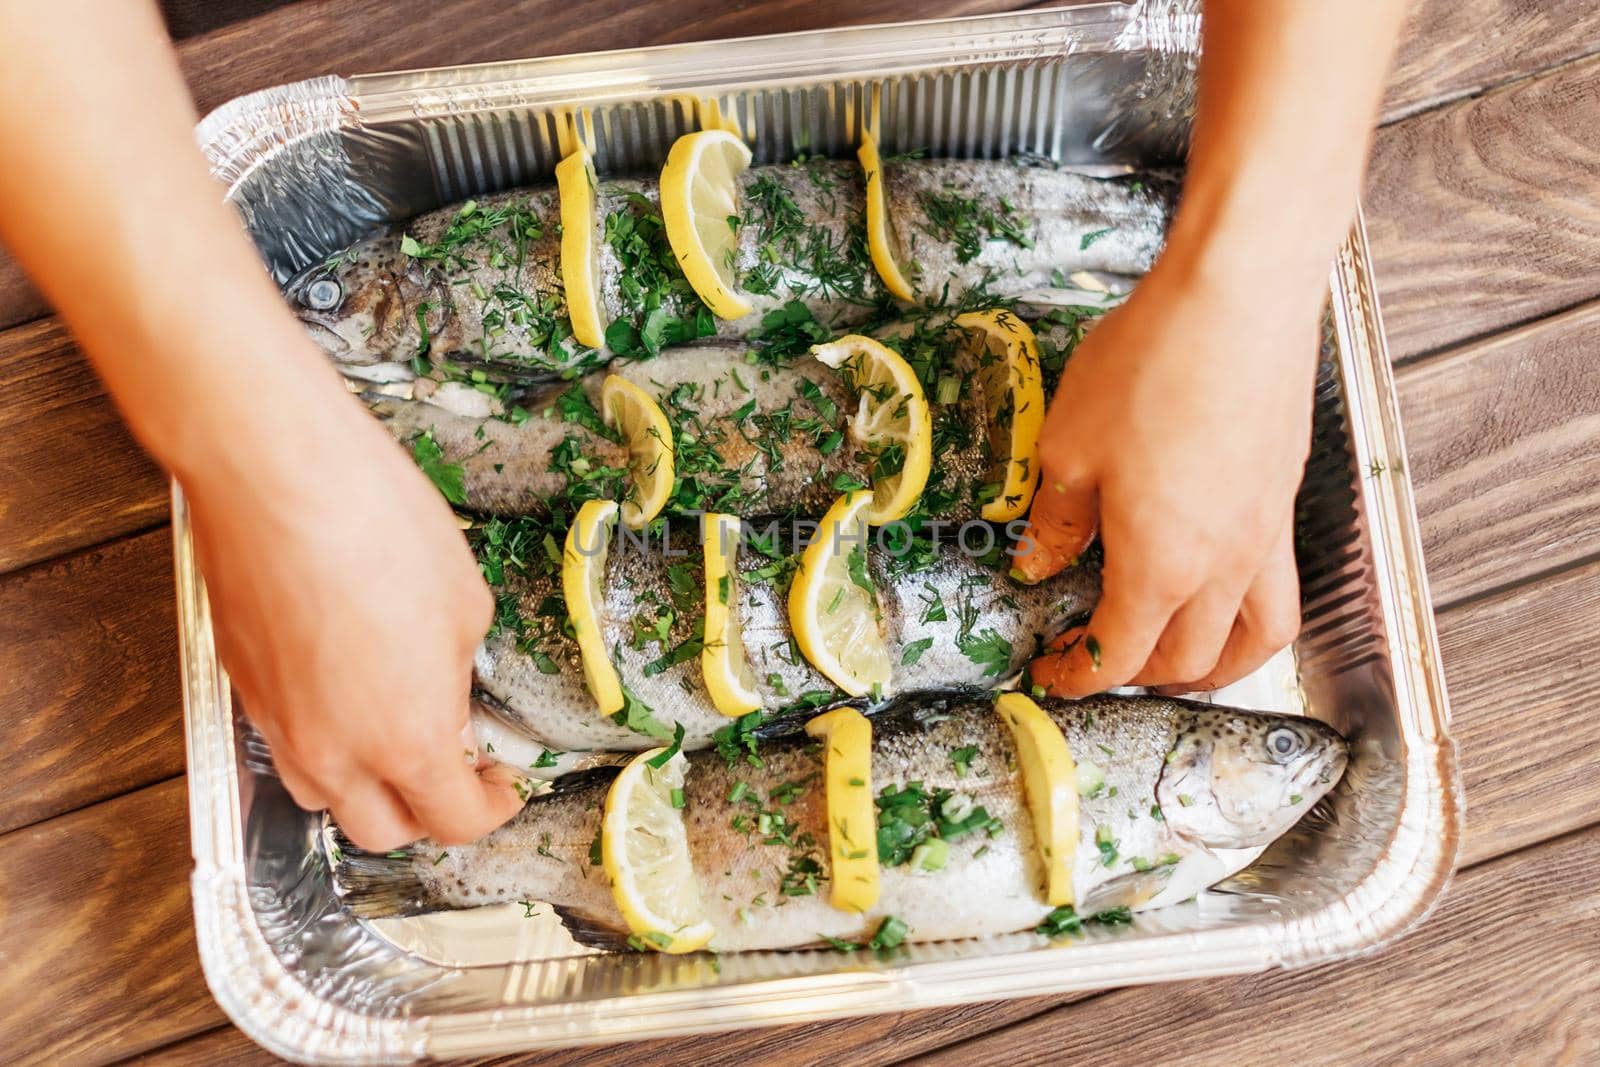 Unrecognizable woman preparing fish trout with lemons and greenery on foil tray, view of hands.